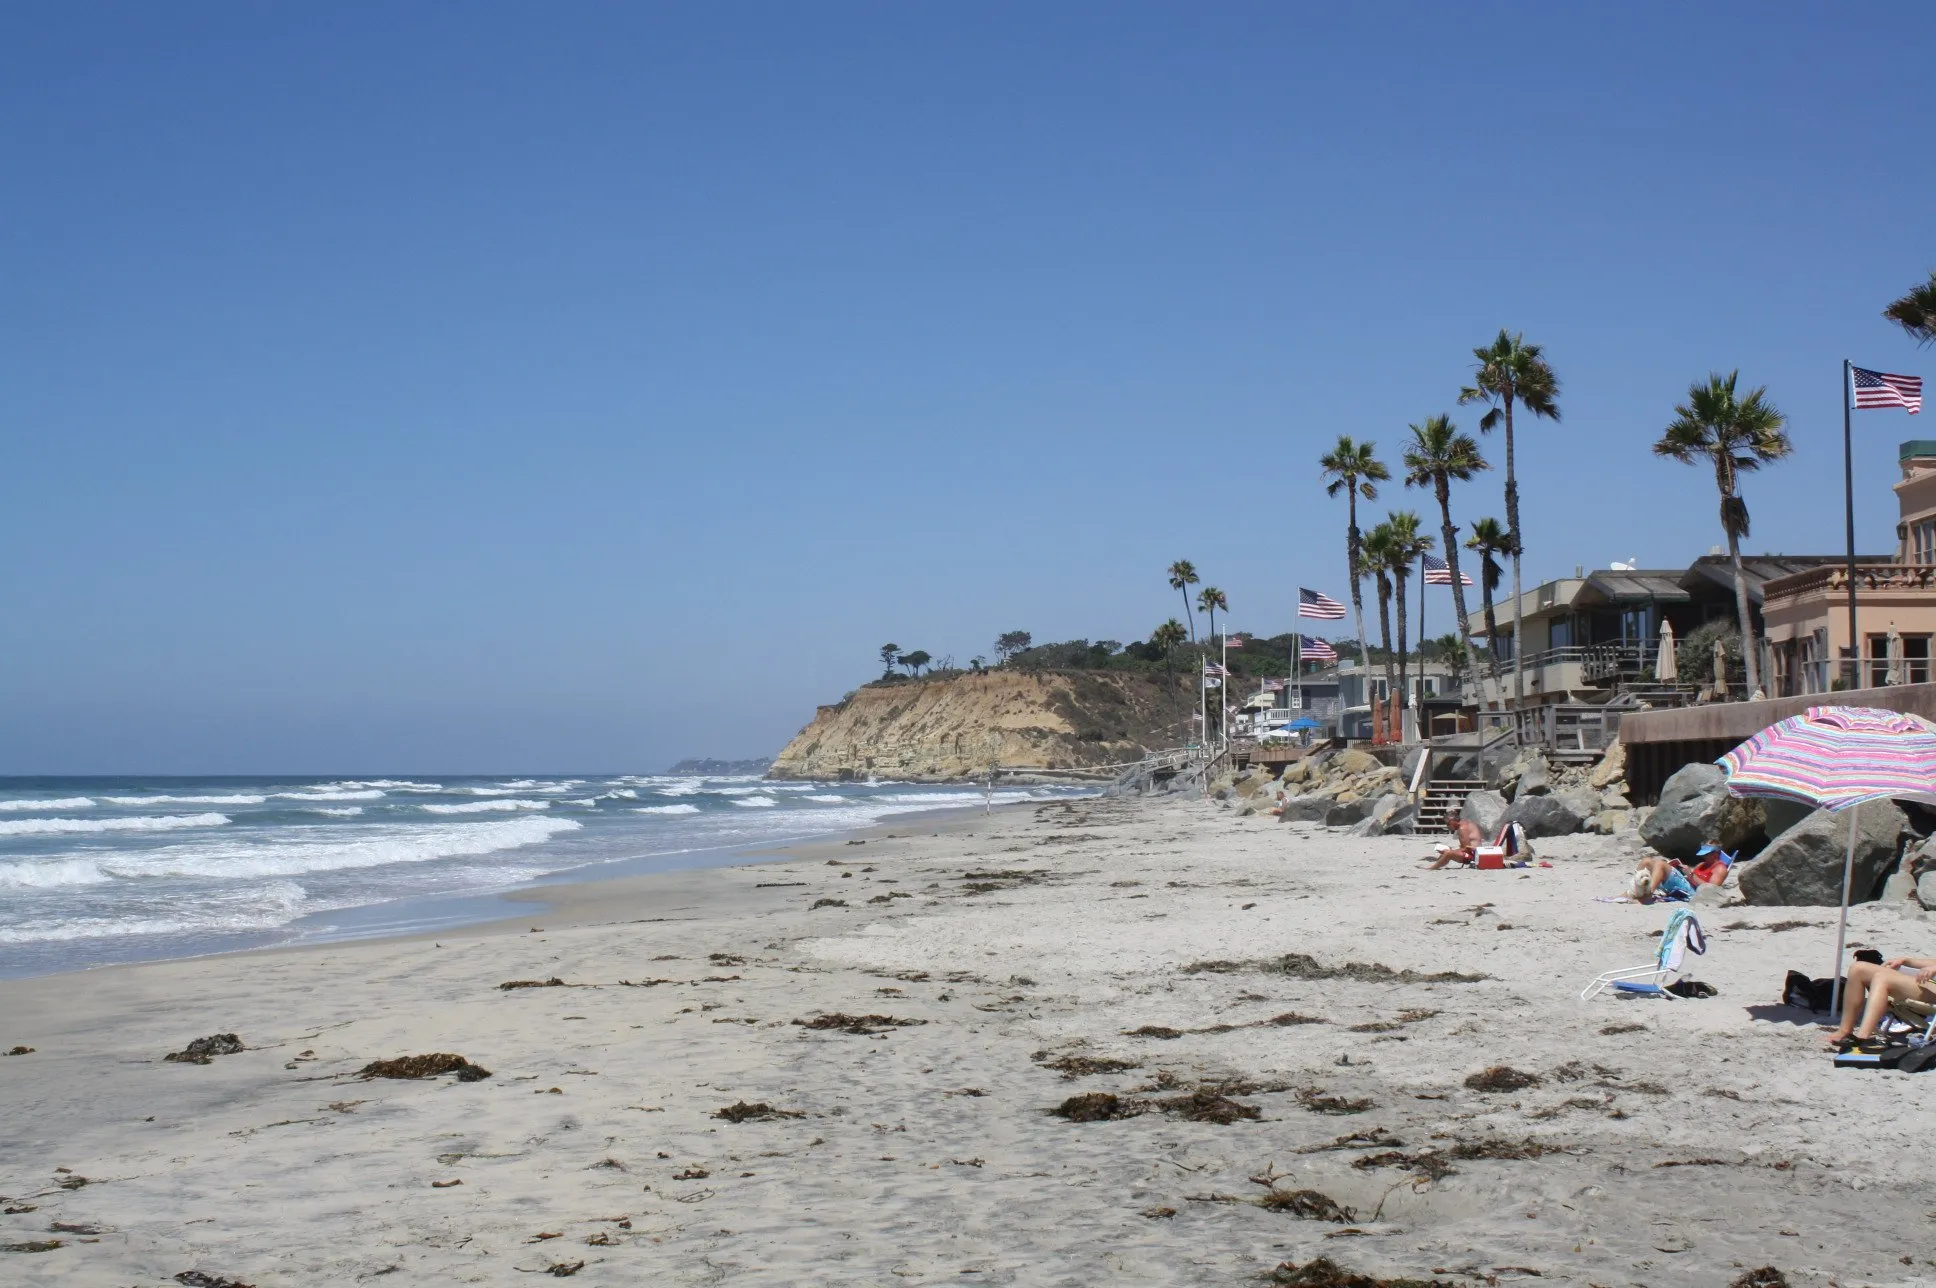 North County San Diego has dozens of awesome beaches.